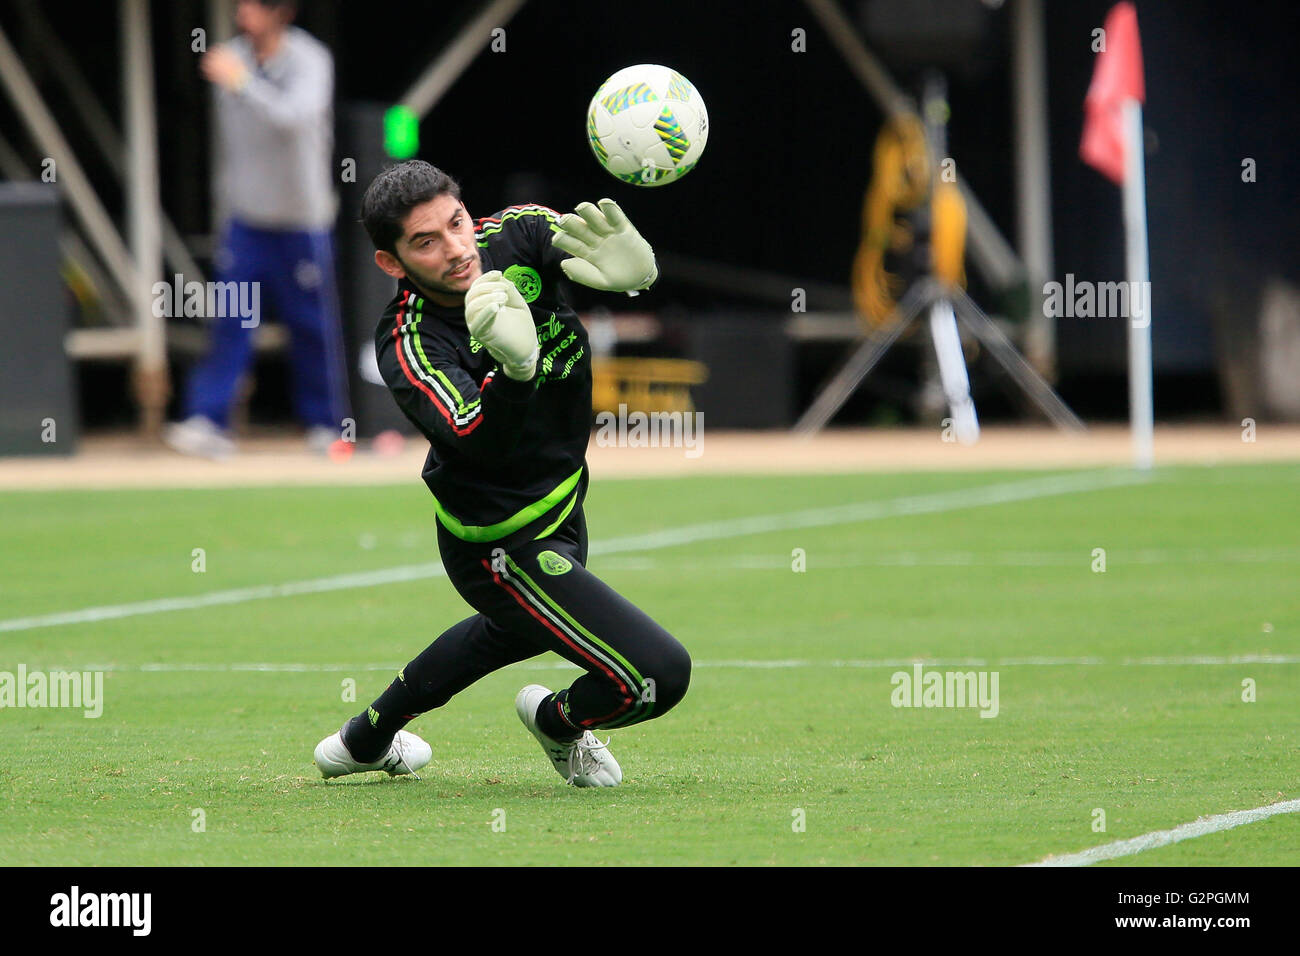 Ca, Usa. 31st May, 2016. SAN DIEGO, CA-MAY 31, 2016: | .José de JesÃºs Corona makes a save during practice at Qualcom Stadium. Mexico faces off in a friendly match against Chile Wednesday. © Misael Virgen/San Diego Union-Tribune/ZUMA Wire/Alamy Live News Stock Photo